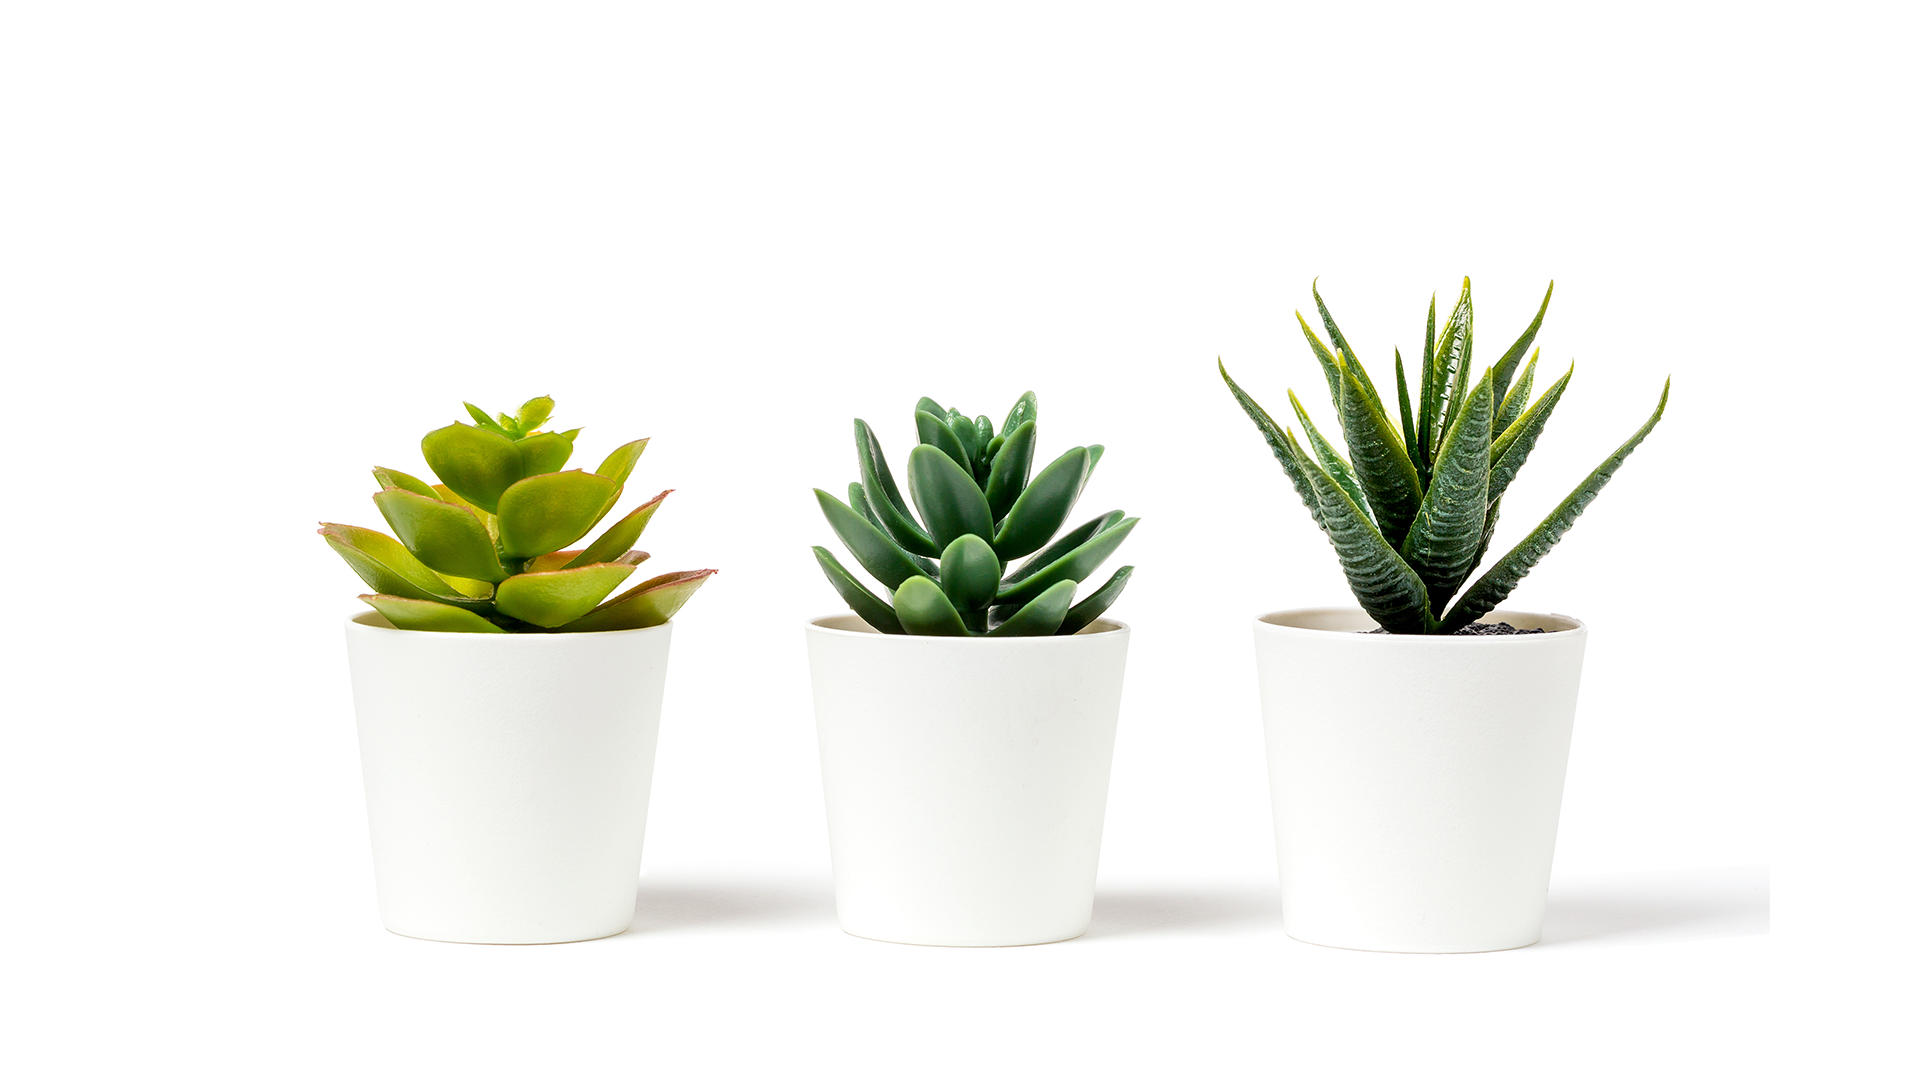 Three succulent plants in white pots on a white background. A perfect gift for mum.